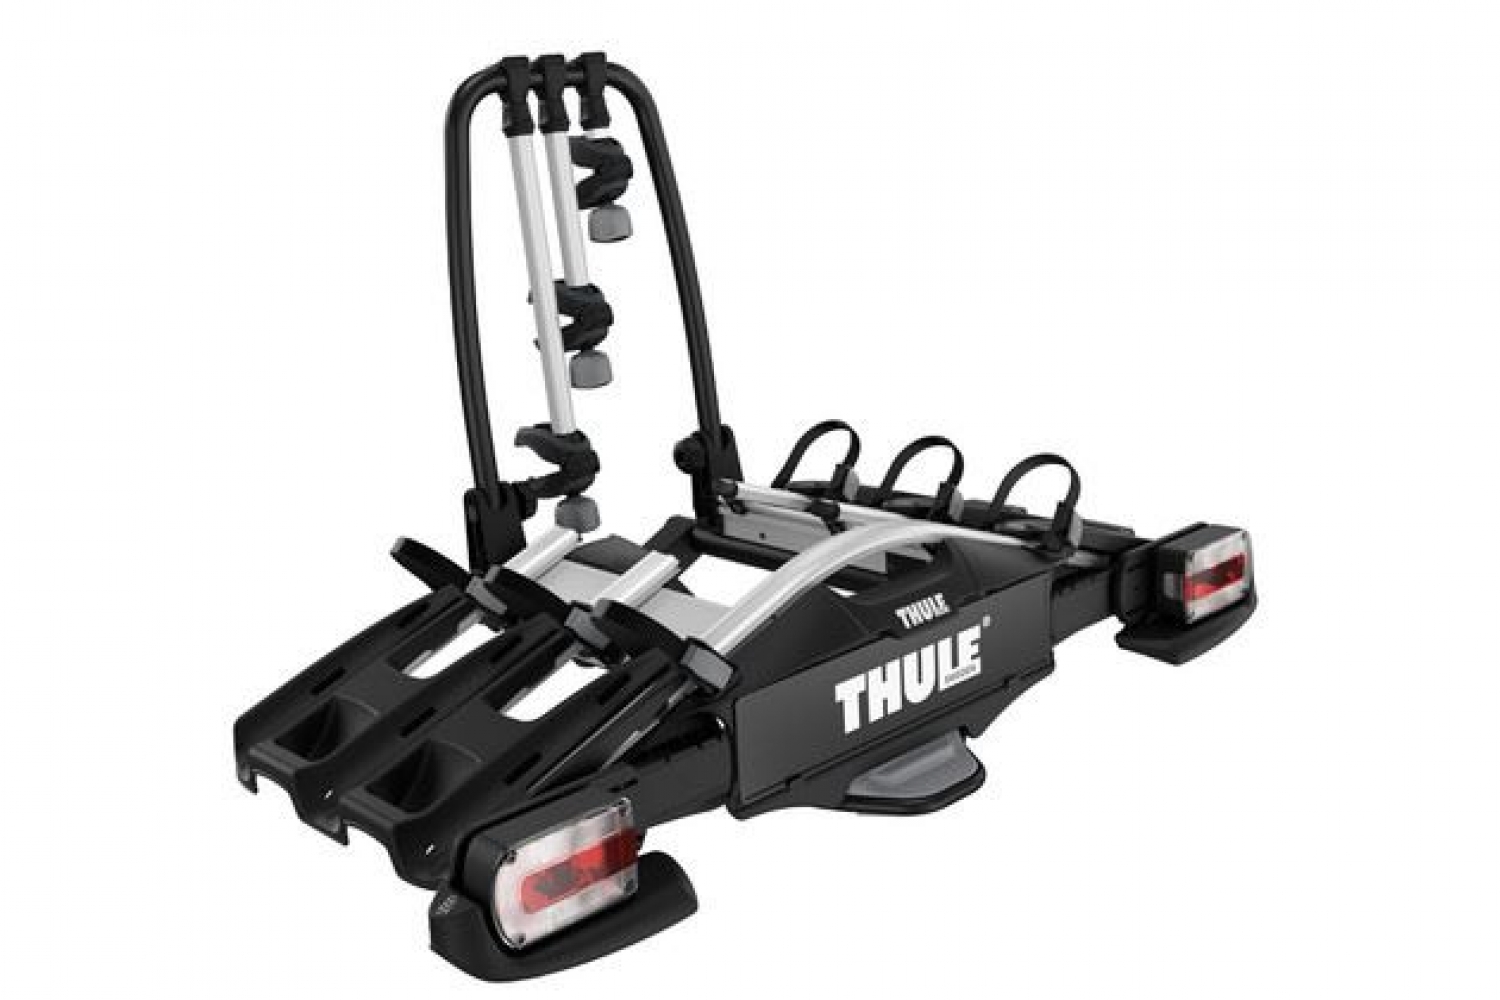 Car rack for transporting bikes - Thule VeloCompact 927